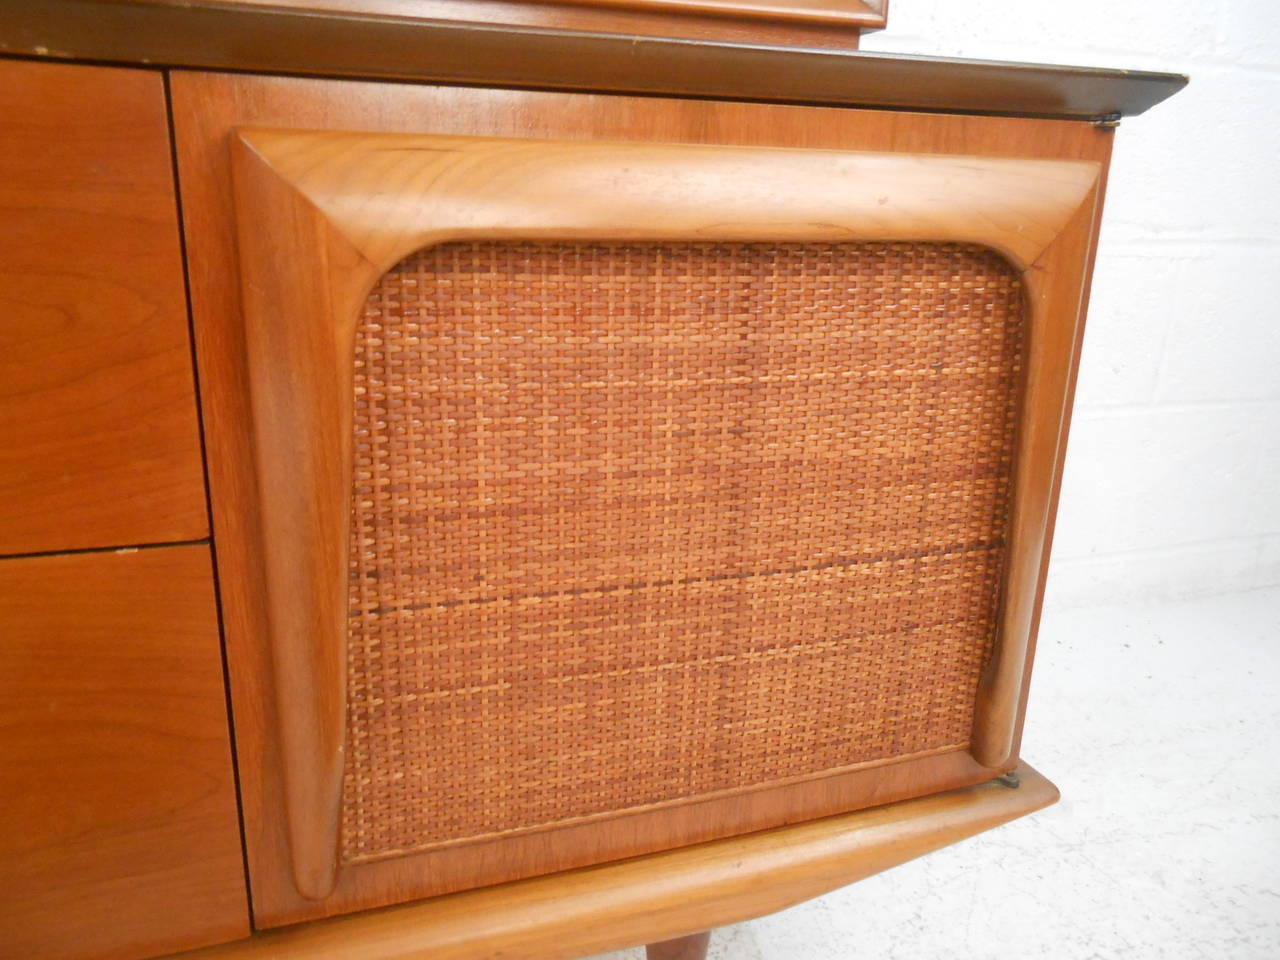 Unique Mid-Century Modern Sideboard Shelving Display With Dropfront Bar 3